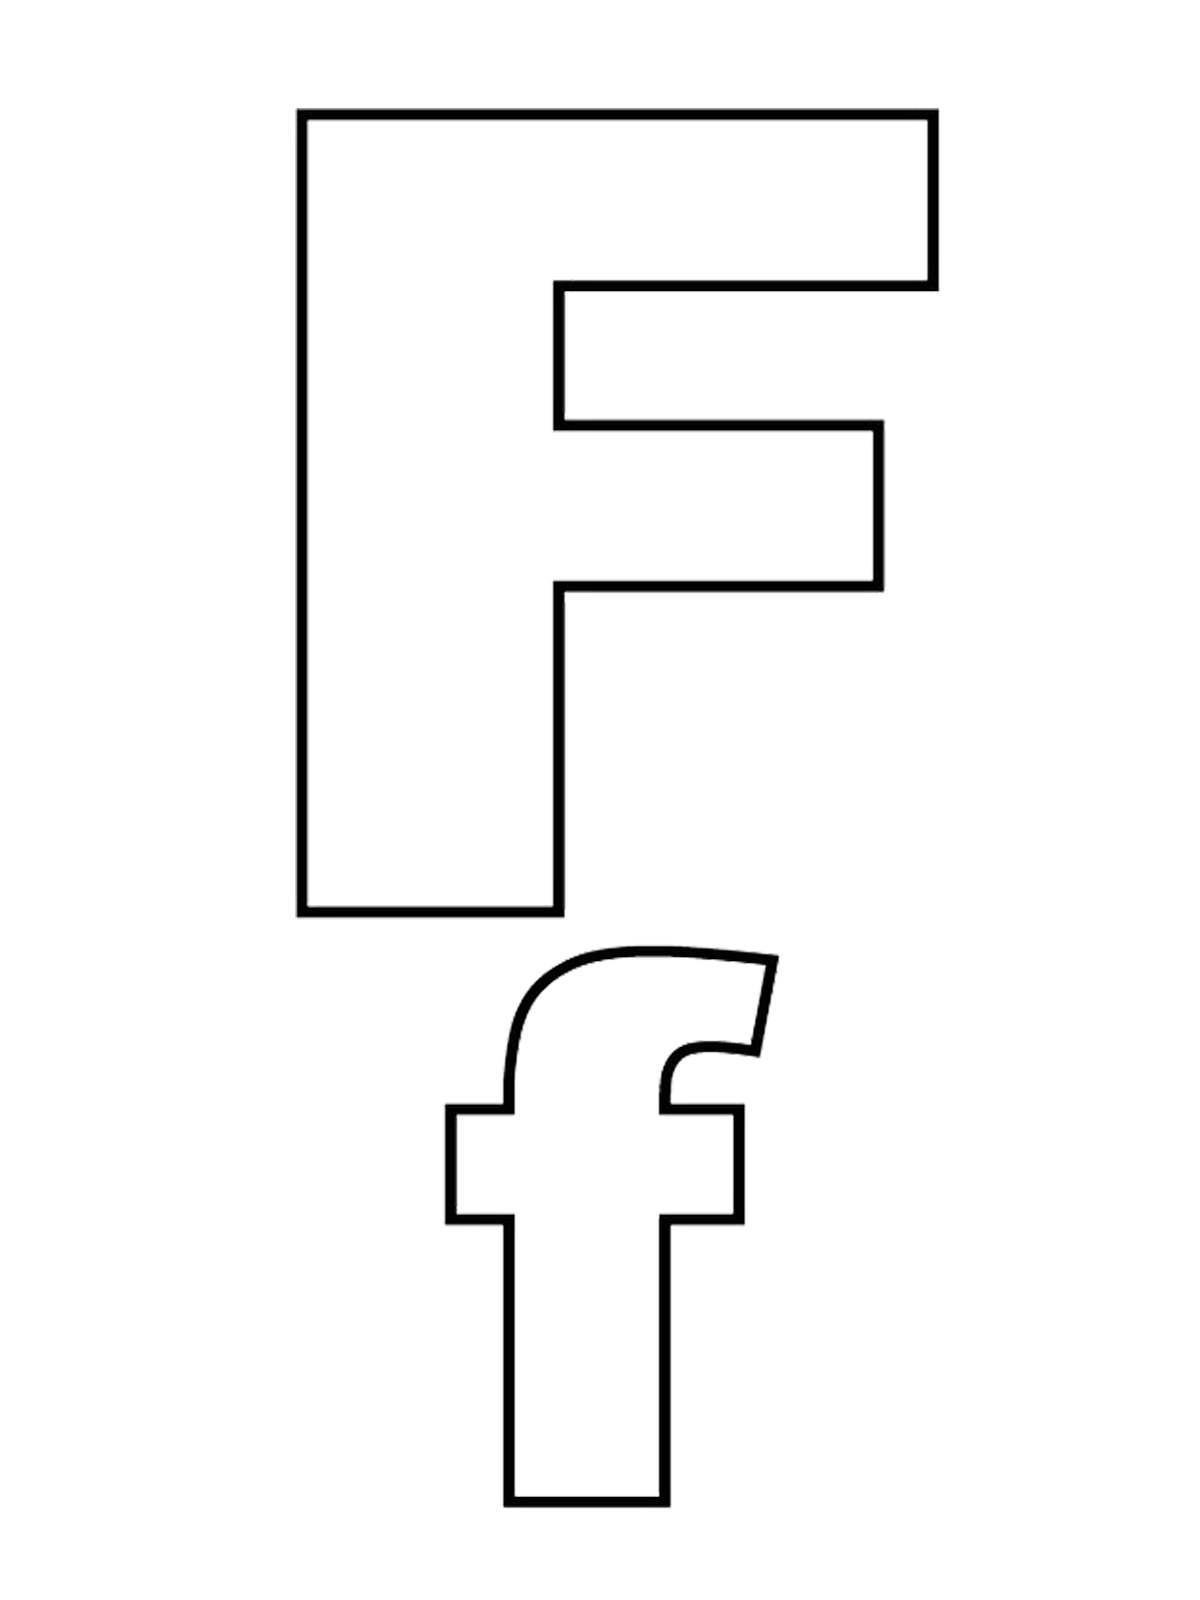 Letters and numbers - Letter F capital letters and lowercase